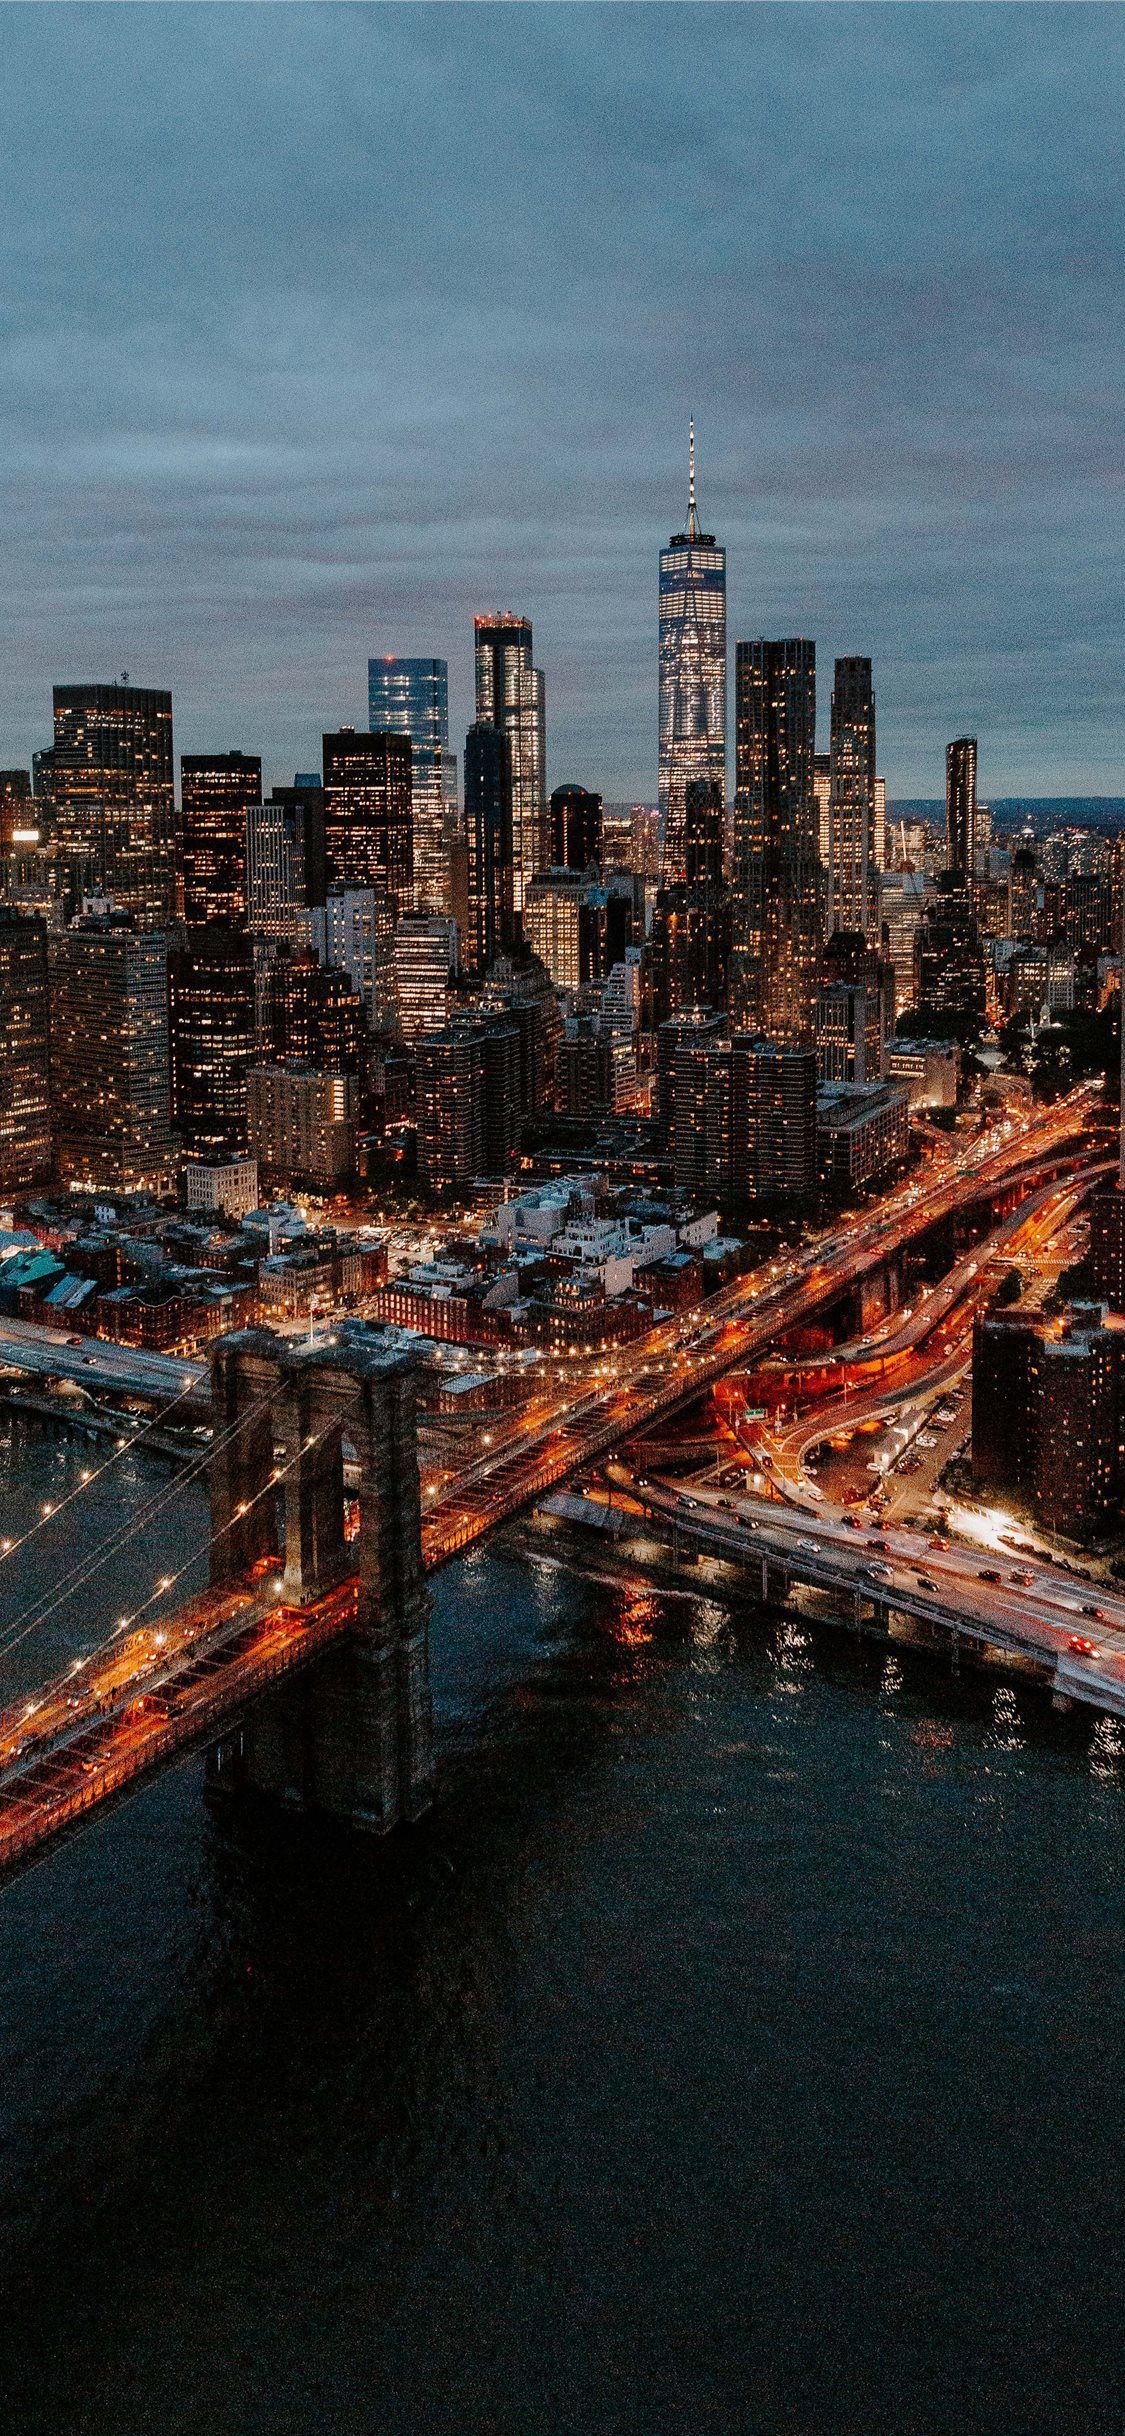 Free download the aerial photography of buildings and bridge wallpaper , beaty your iphone. #scenery #ci. City aesthetic, New york wallpaper, New york city travel